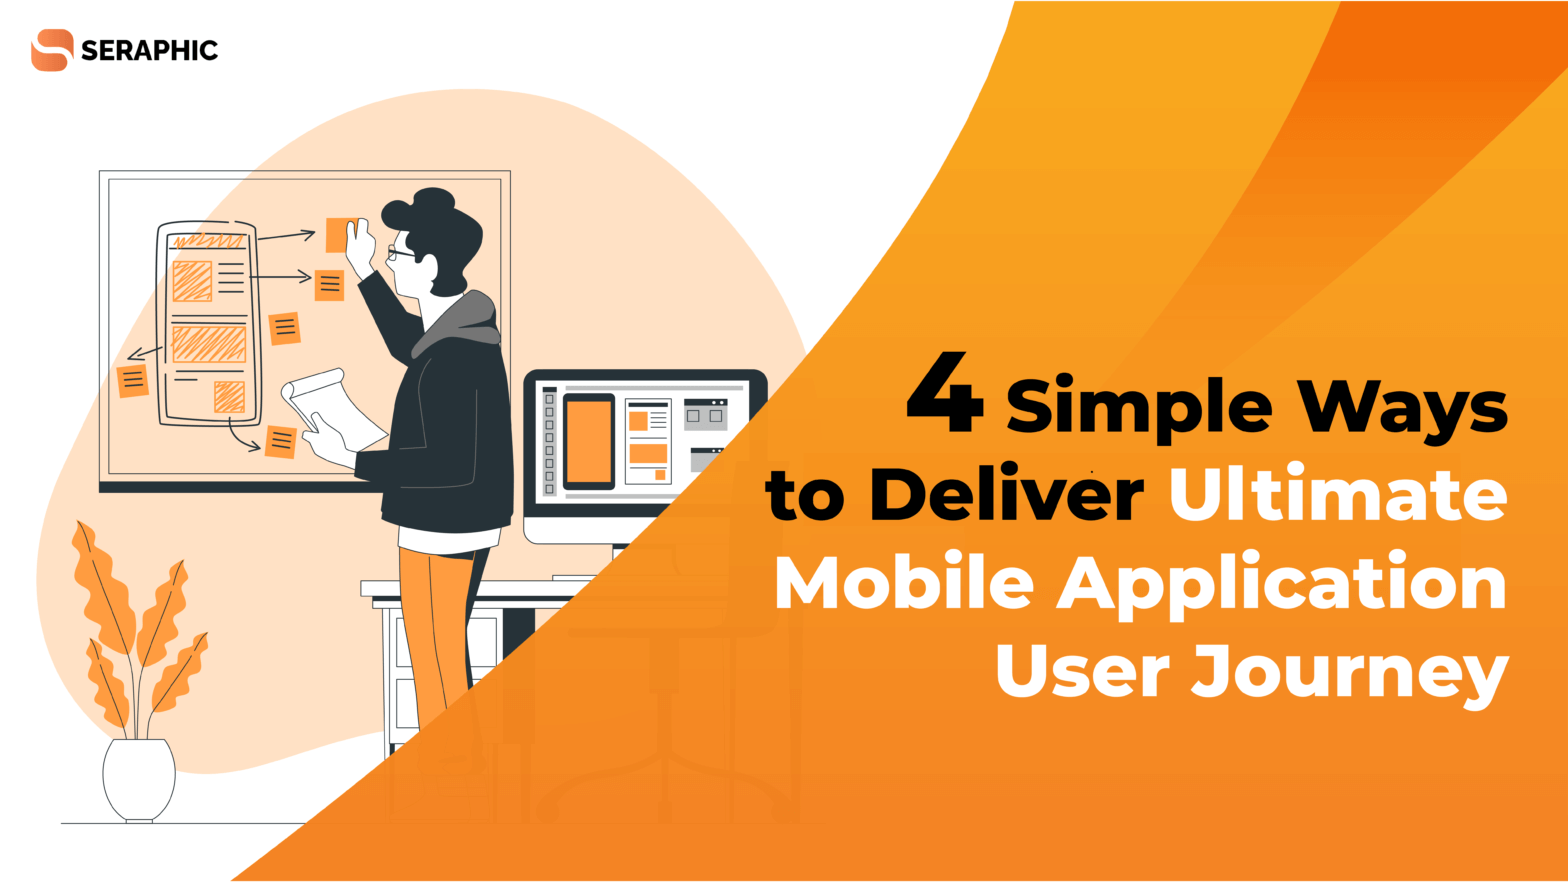 4 Simple Ways to Deliver Ultimate Mobile Application User Journey